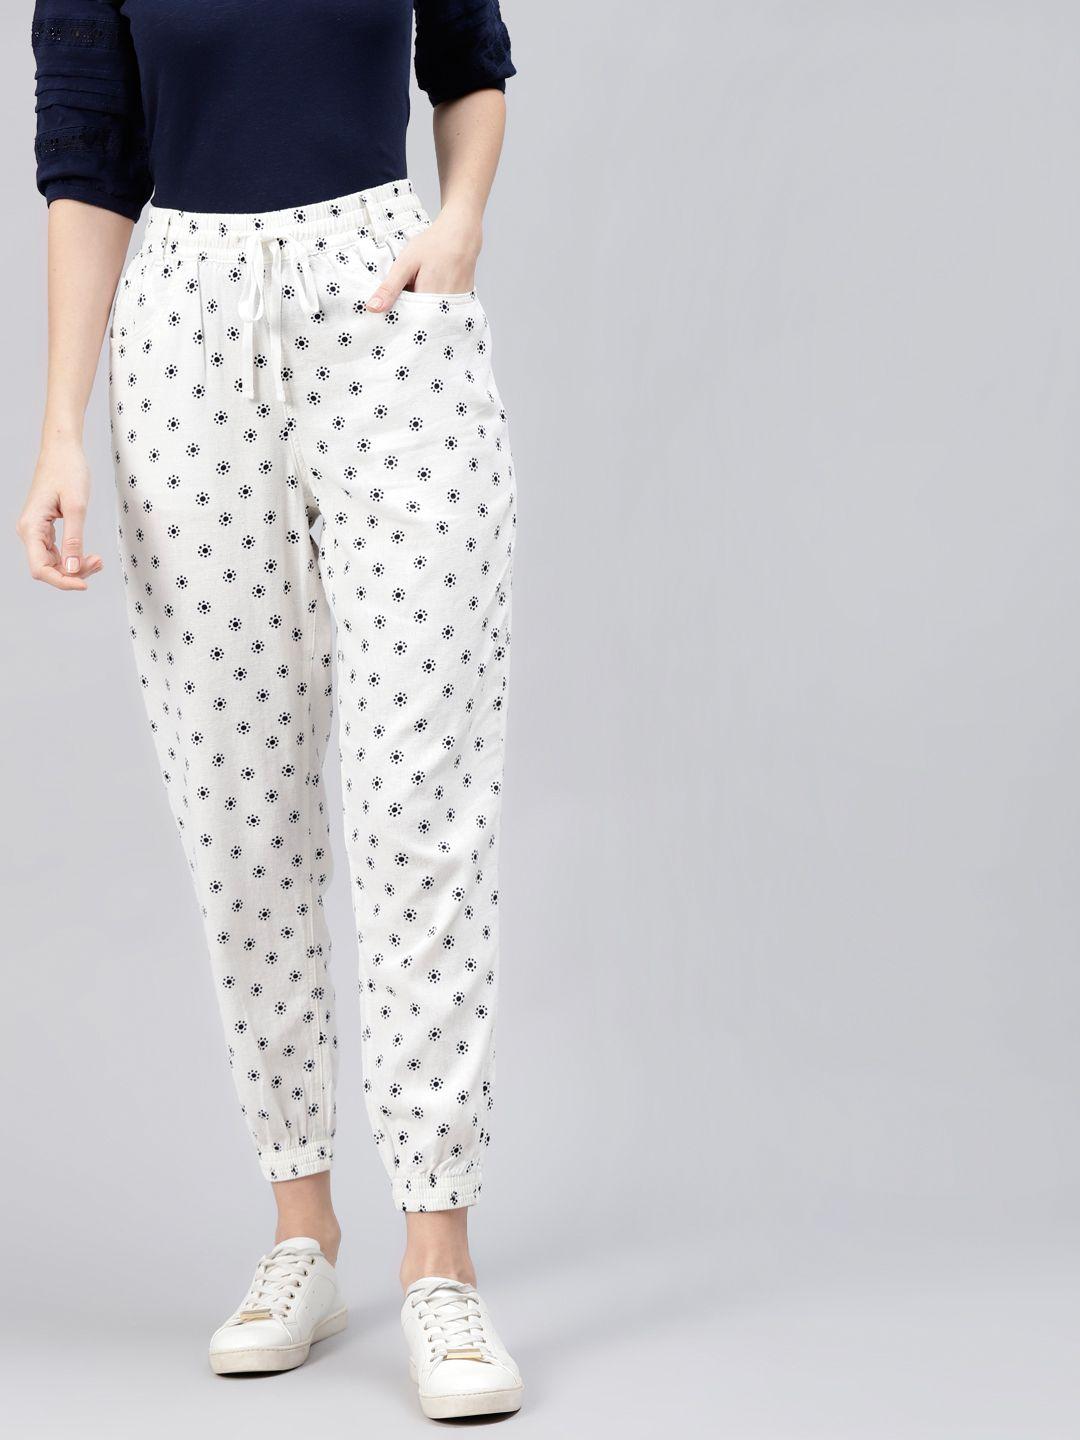 marks & spencer women white floral printed slim fit linen joggers trousers